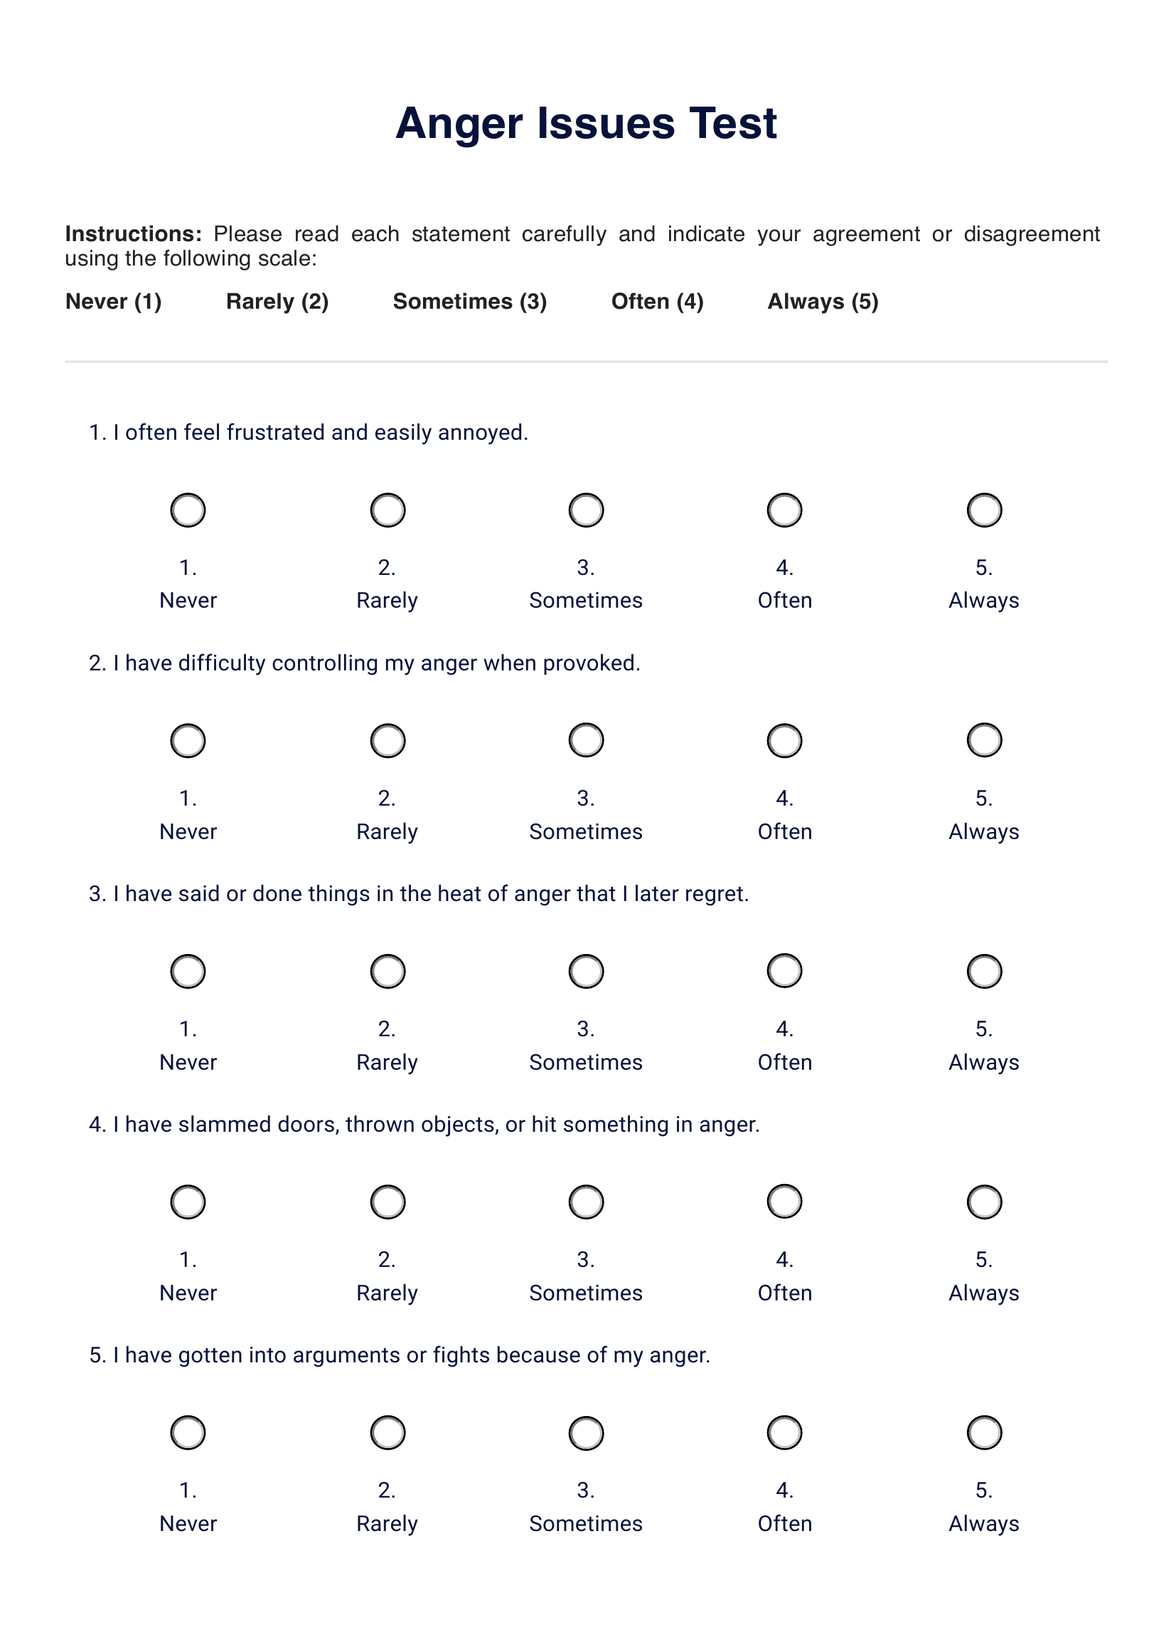 Anger Issues Test PDF Example